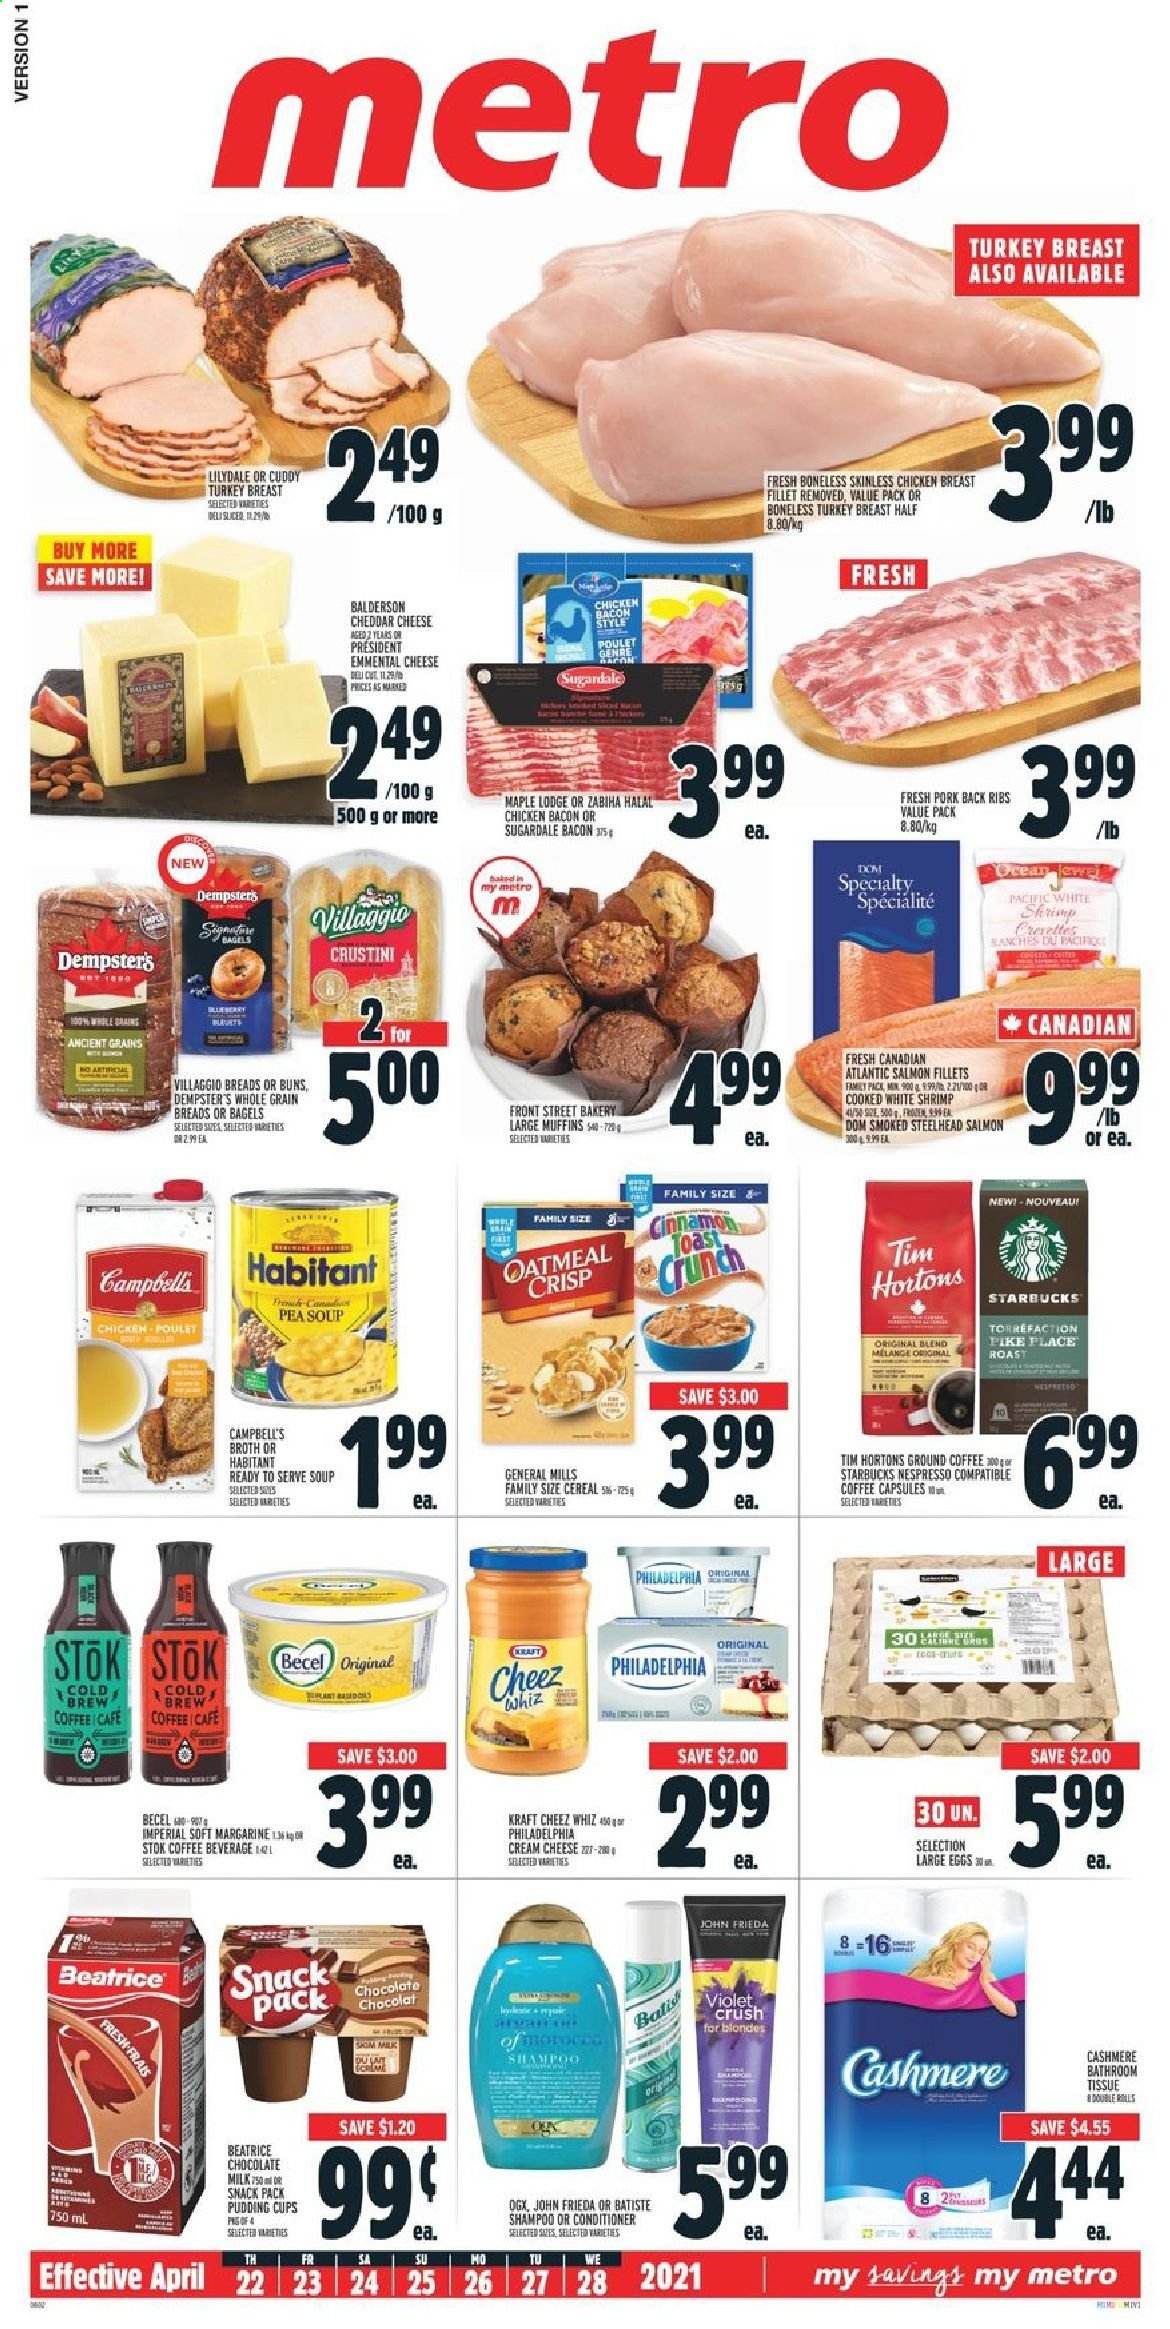 thumbnail - Metro Flyer - April 22, 2021 - April 28, 2021 - Sales products - bagels, buns, muffin, salmon, salmon fillet, shrimps, Campbell's, soup, Kraft®, Sugardale, bacon, cheddar, cheese, Président, pudding, margarine, chocolate, snack, oatmeal, broth, cereals, cinnamon, coffee, Nespresso, coffee capsules, Starbucks, turkey breast, chicken breasts, chicken, turkey, bath tissue, conditioner, John Frieda, cup, shampoo. Page 1.